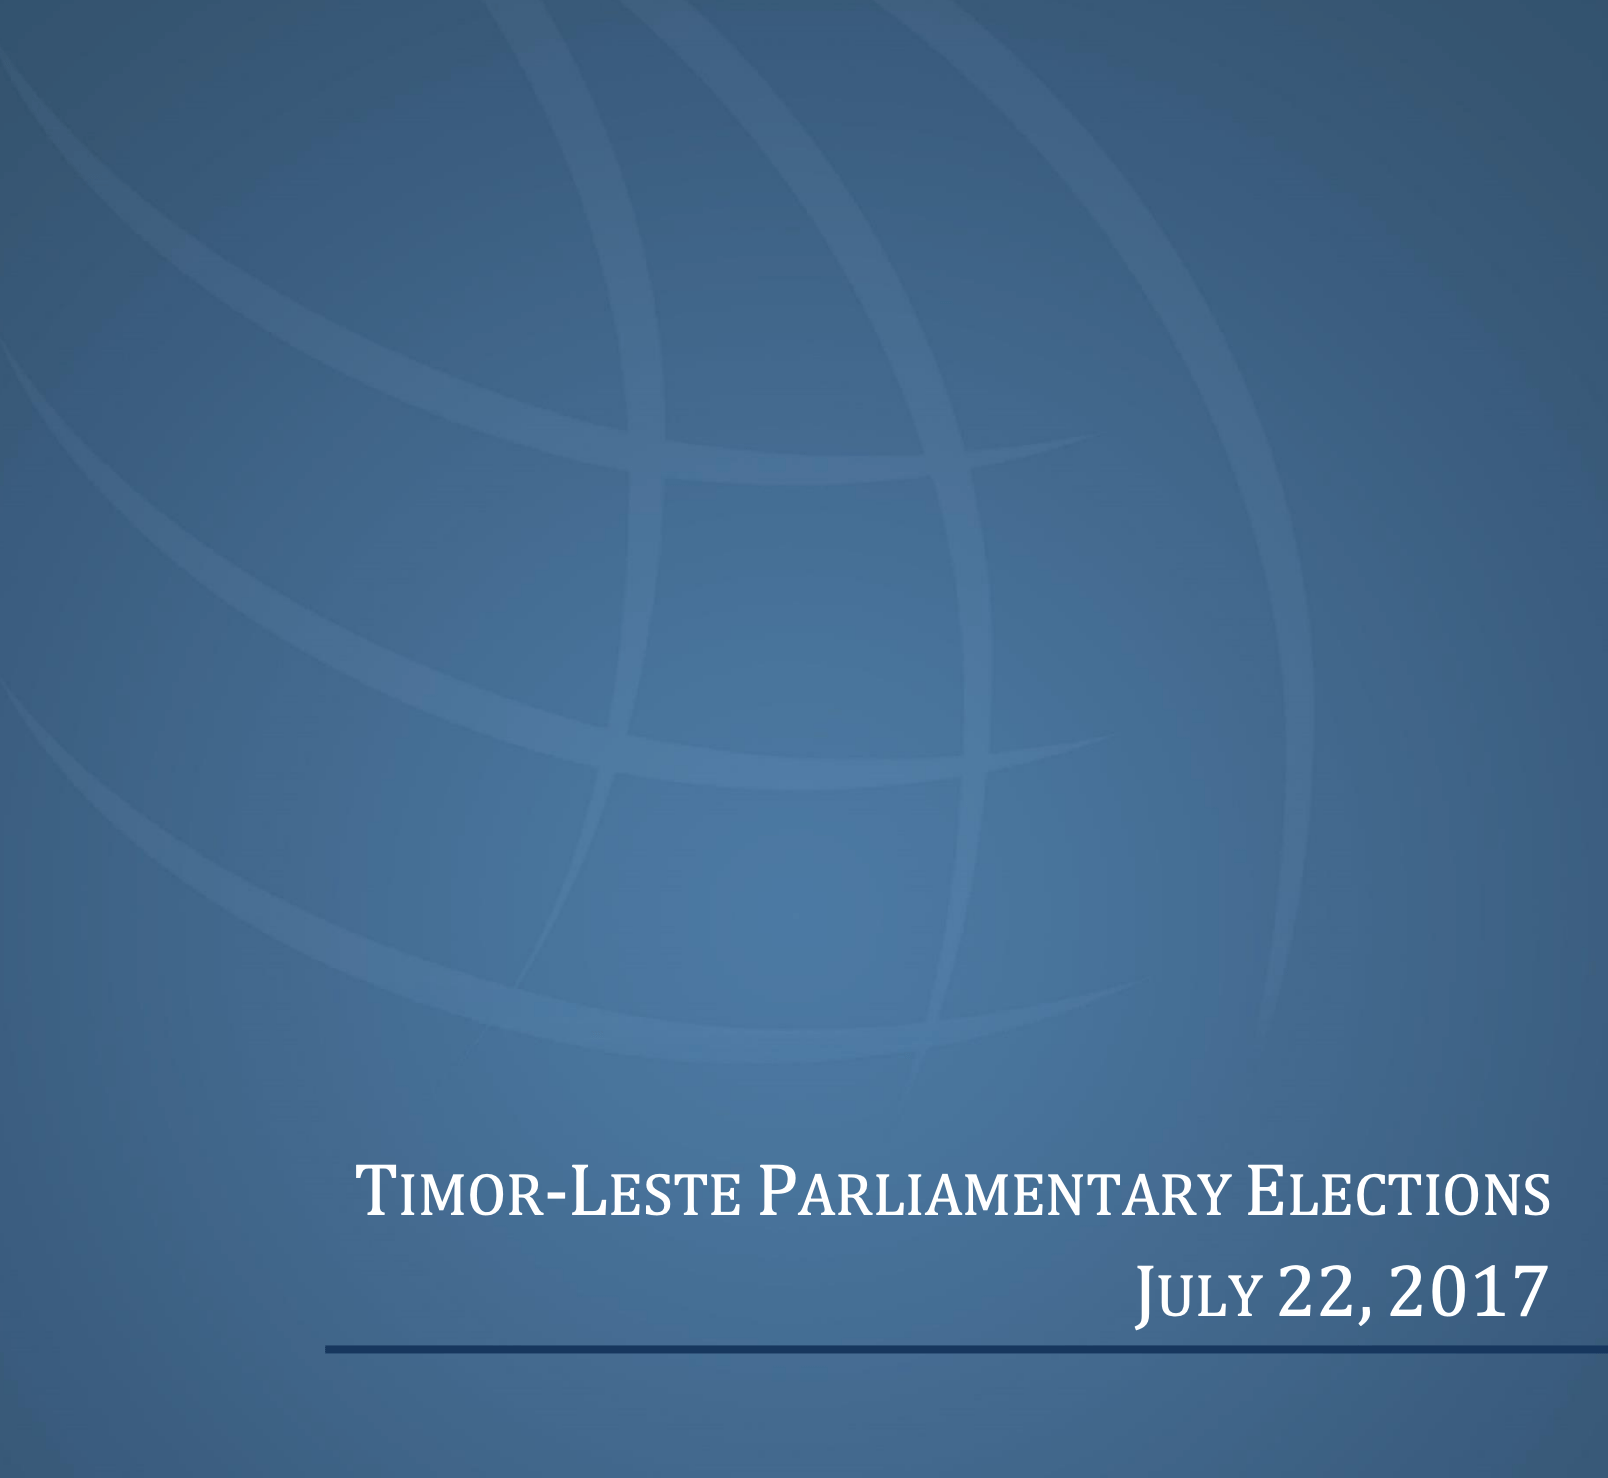 TIMOR-LESTE PARLIAMENTARY ELECTIONS JULY 22, 2017